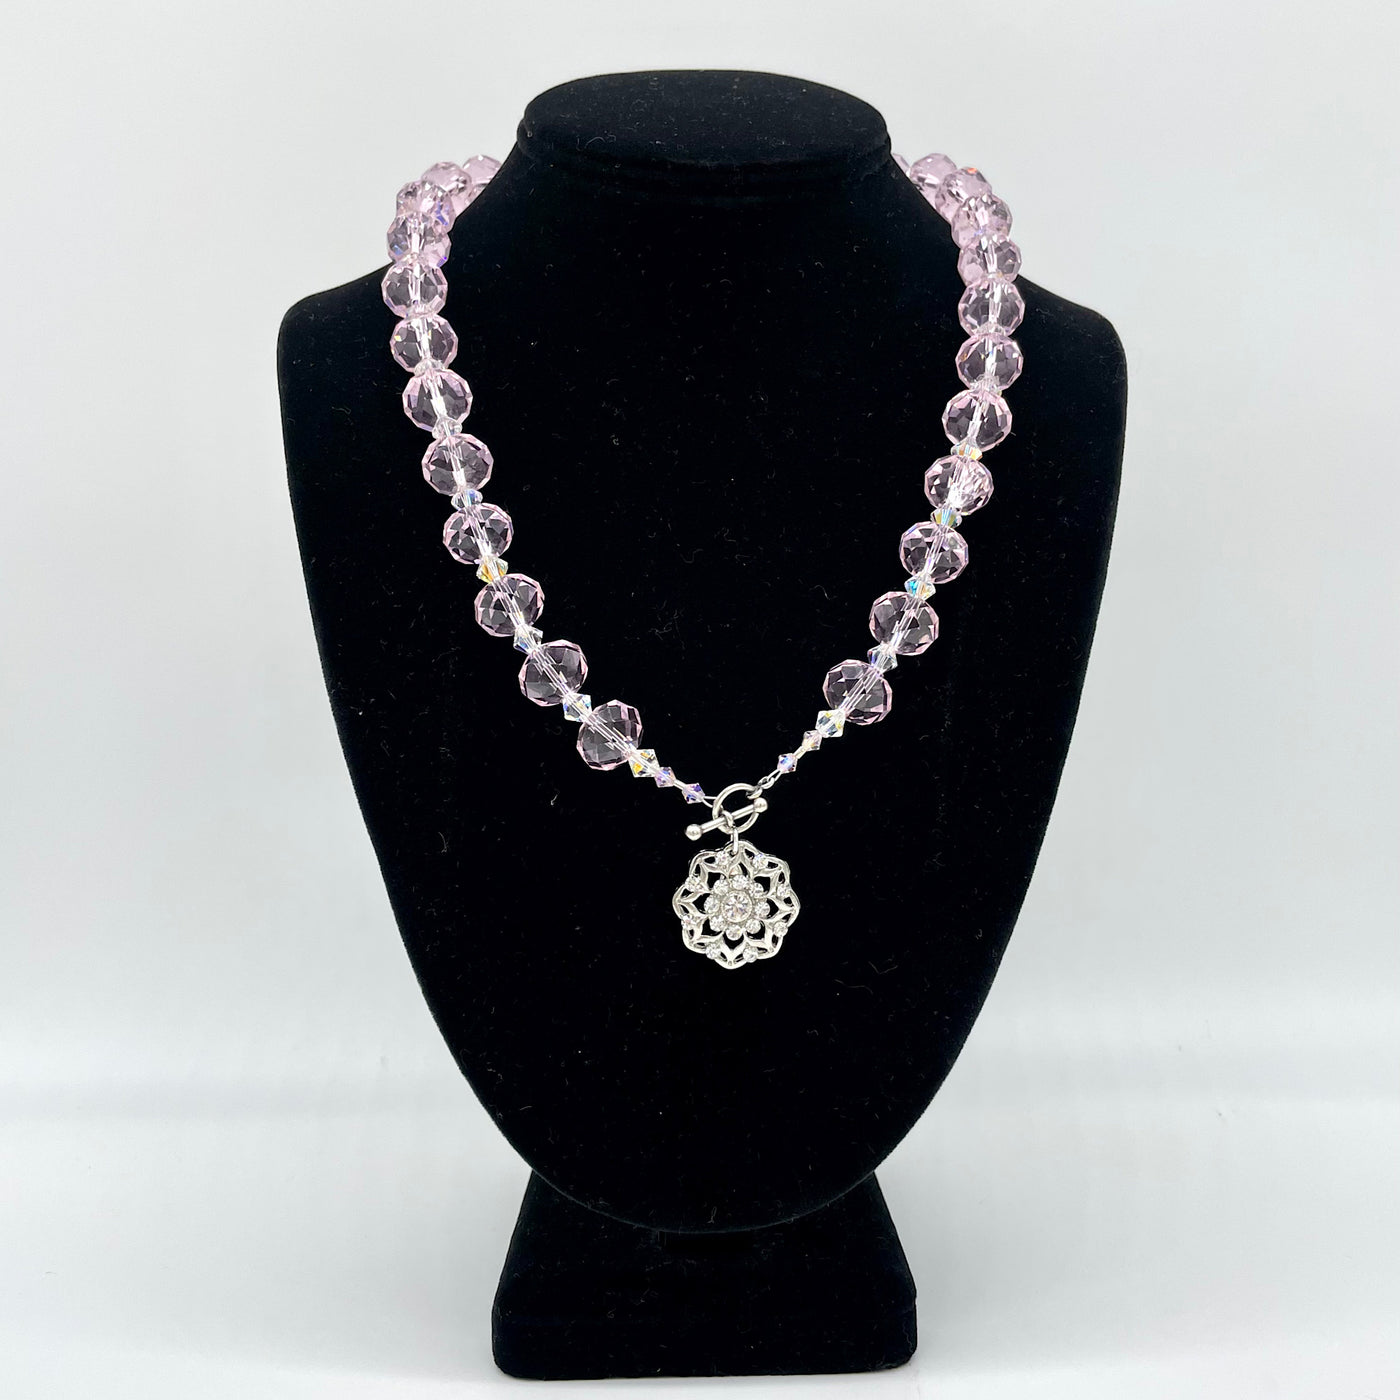 Handcrafted Pink Crystal Beaded Necklace